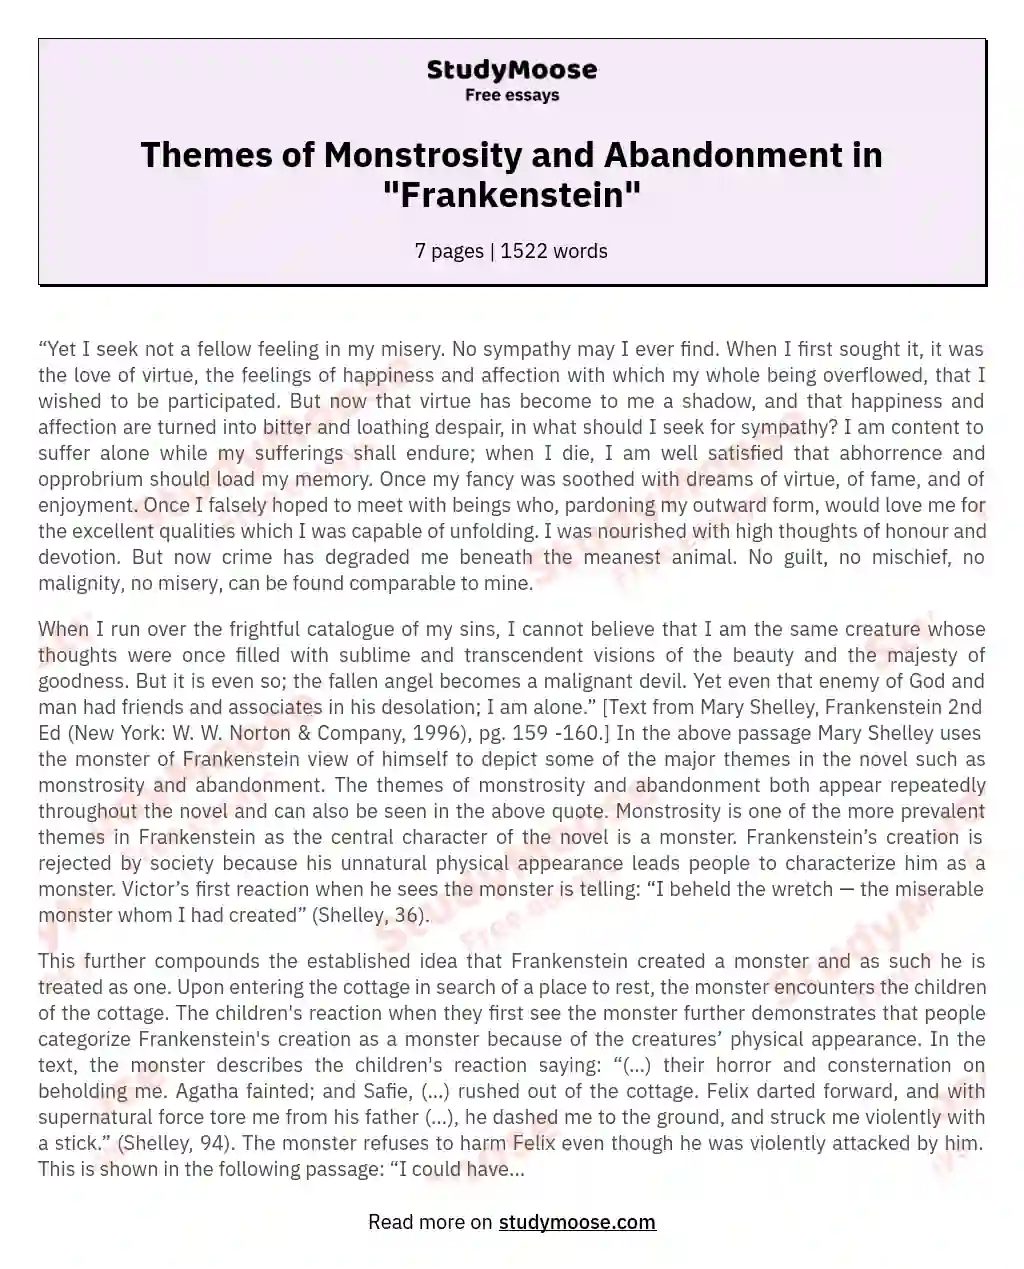 Themes of Monstrosity and Abandonment in "Frankenstein" essay